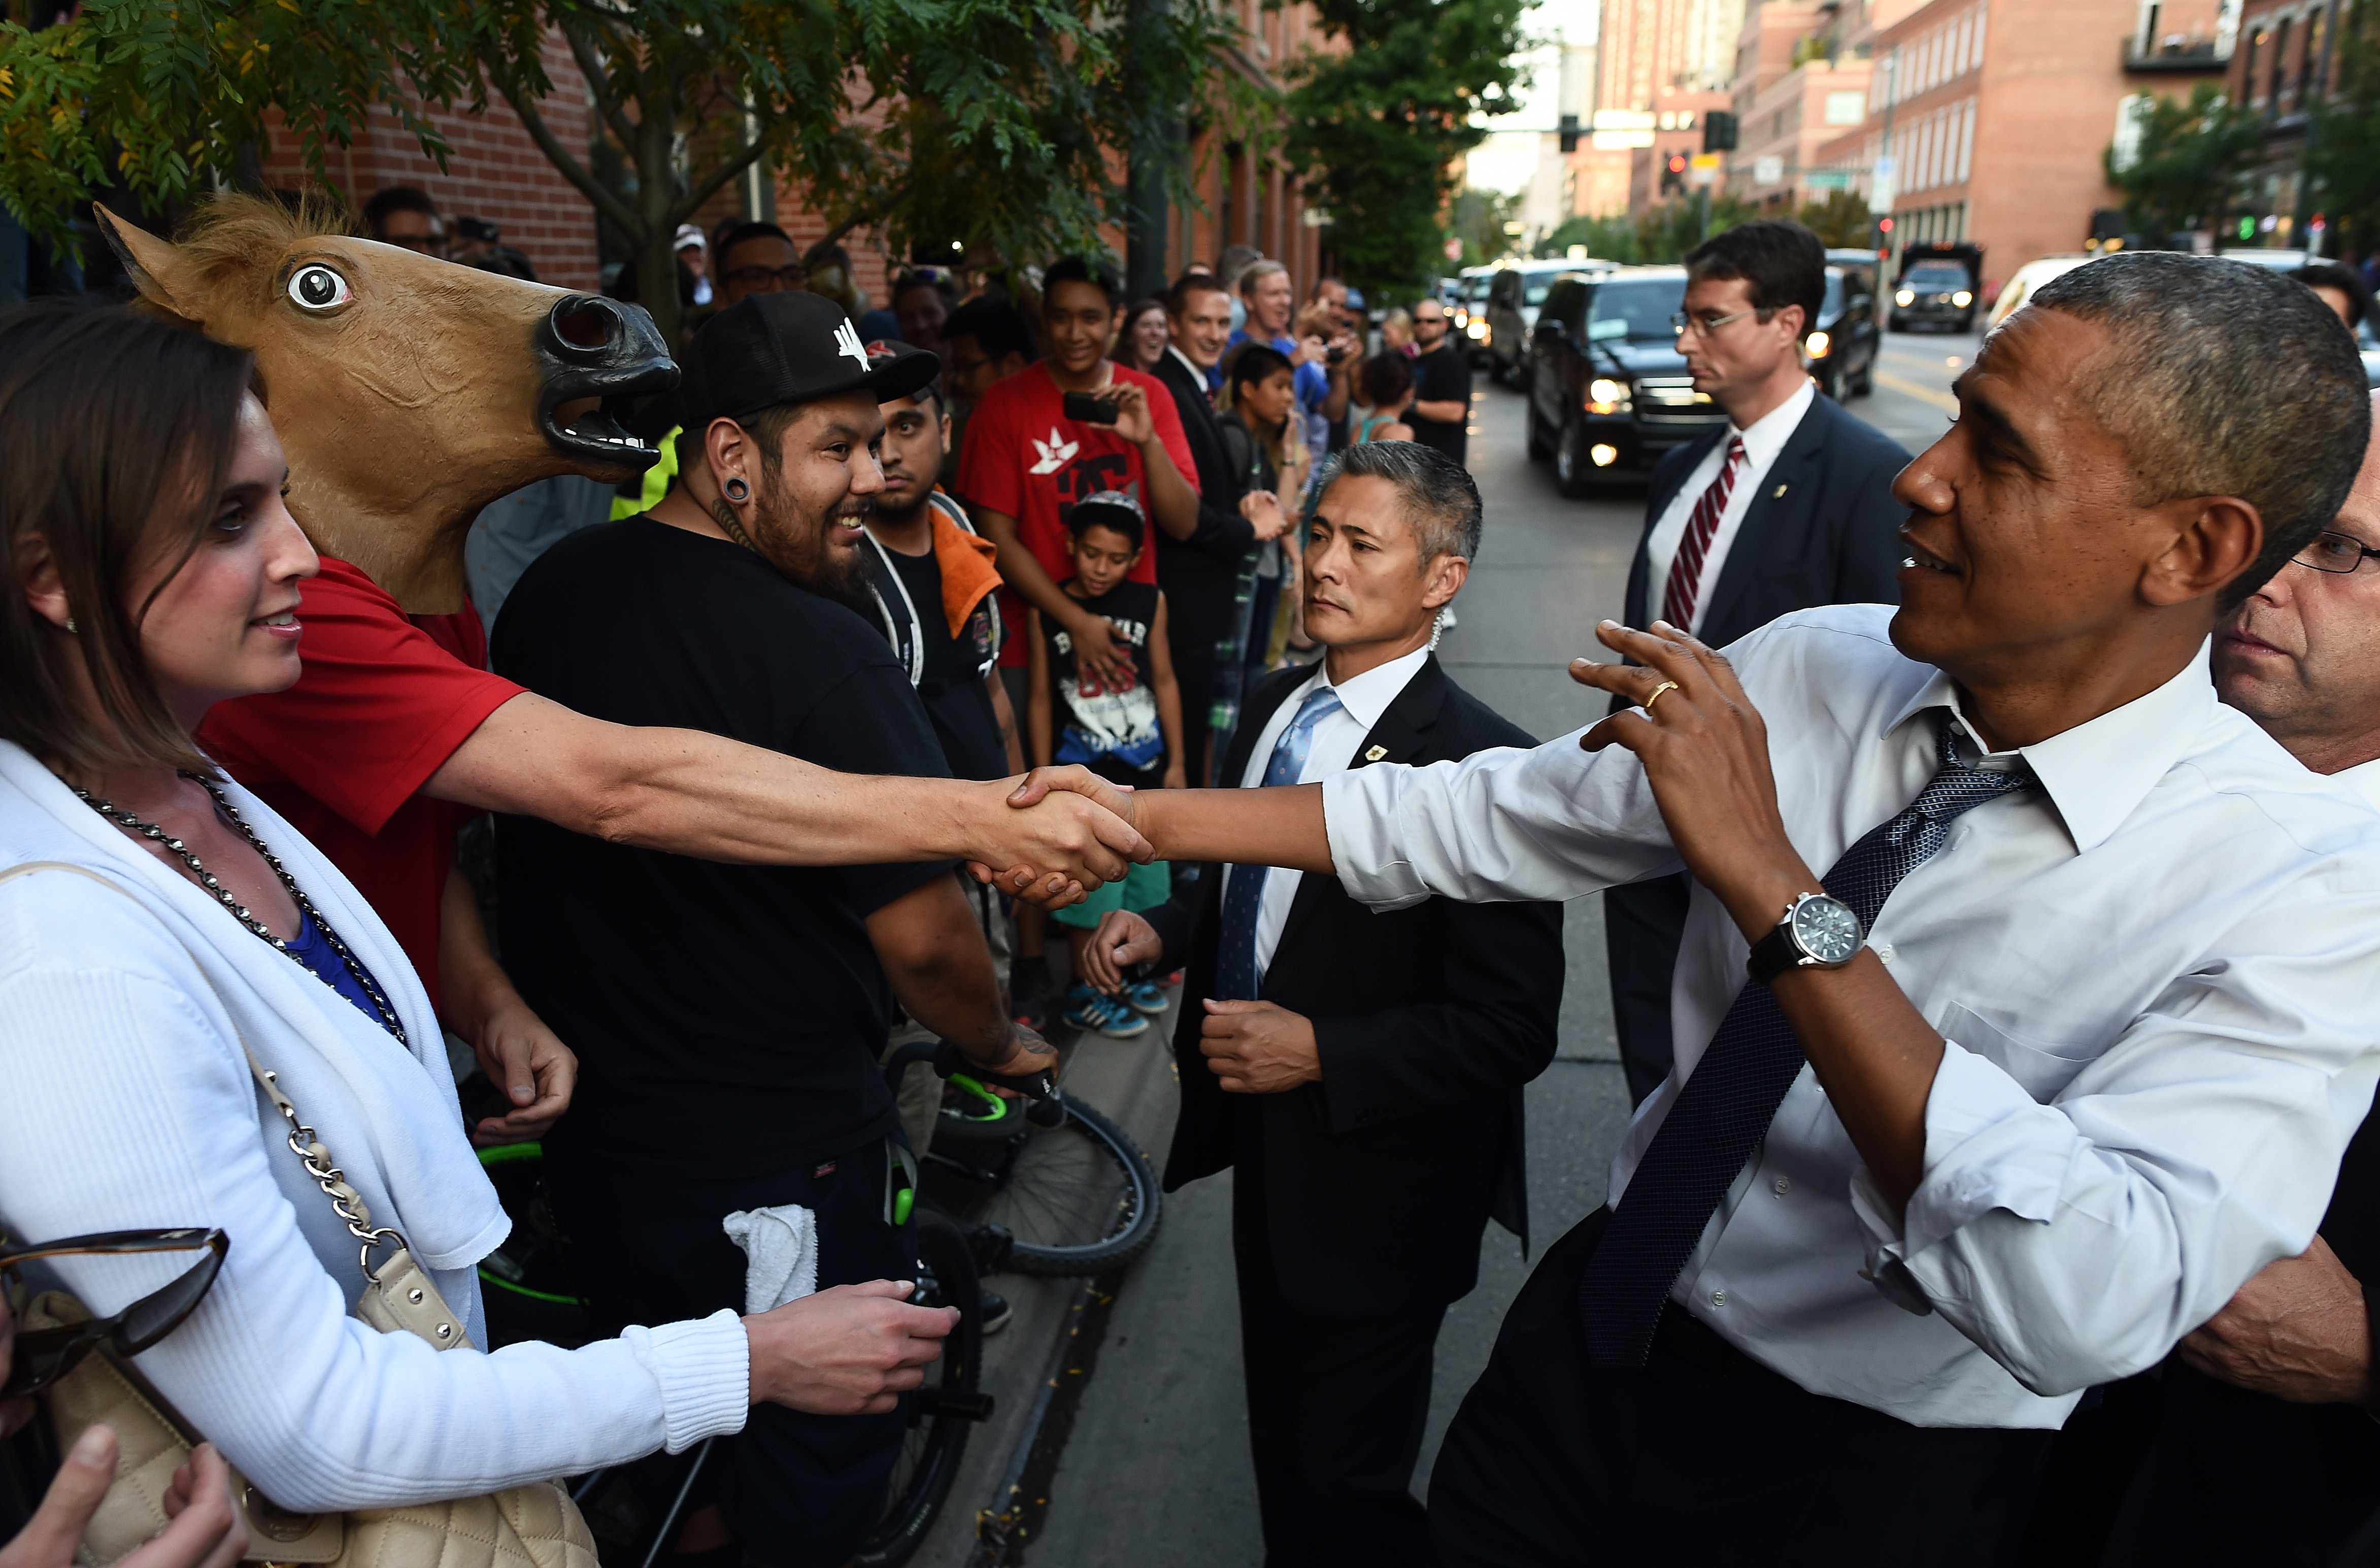 President Obama jokingly reacts as he shakes hands with a man wearing a horse head mask on a street in Denver, Colo., on July 8, 2014. (Jewel Samad—AFP/Getty Images)